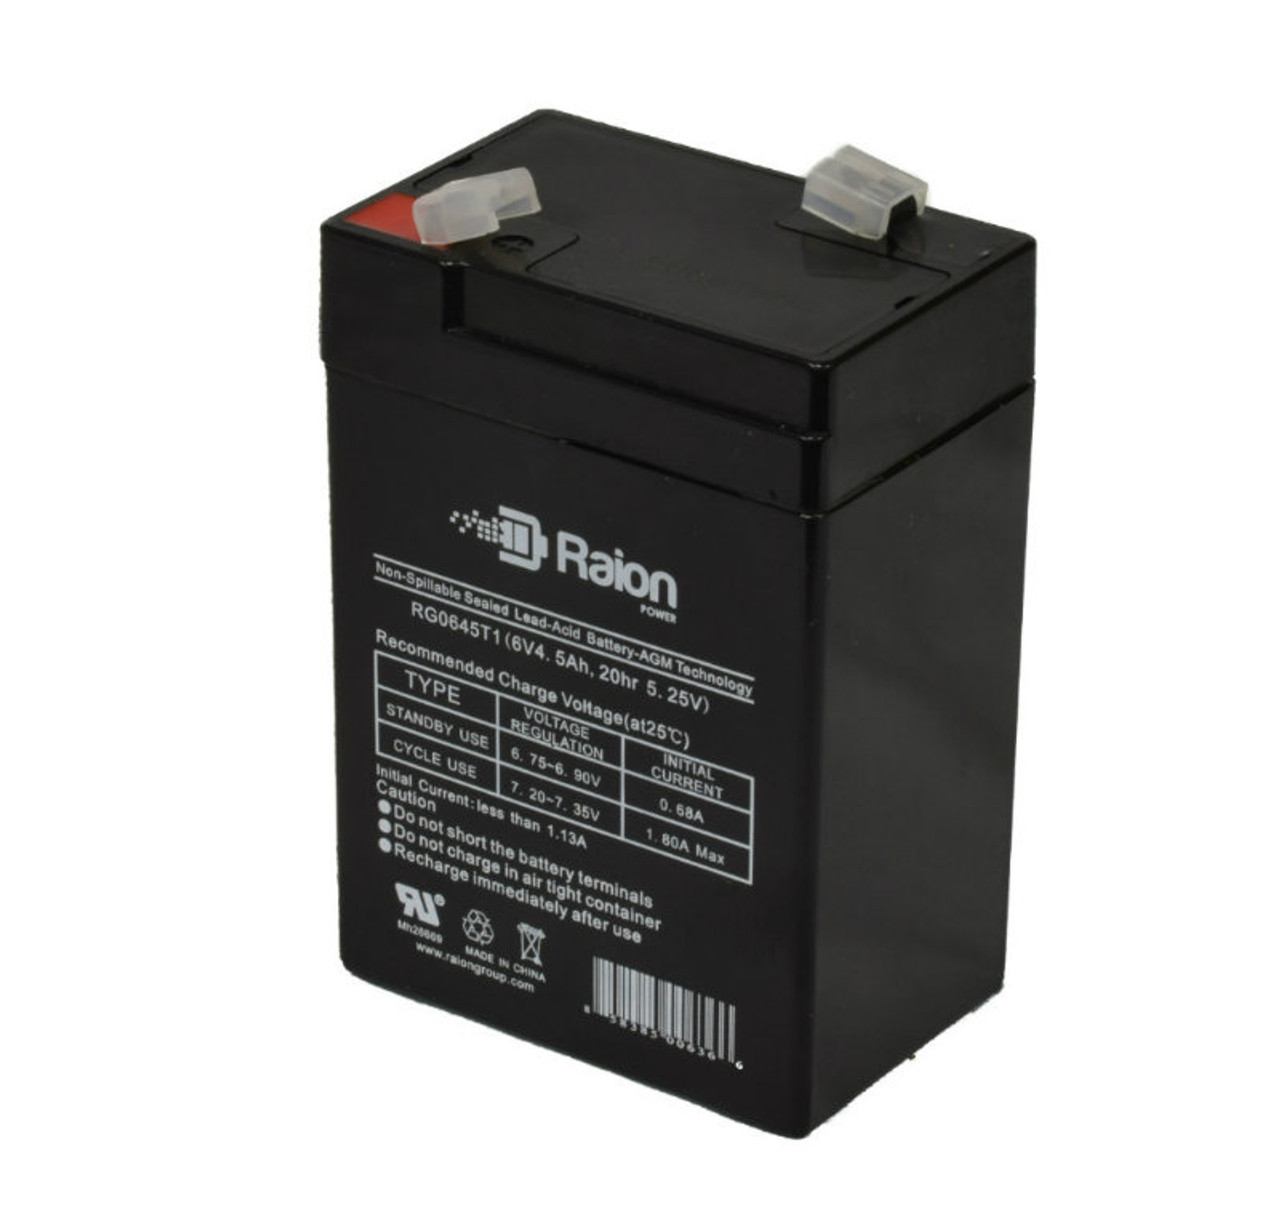 Raion Power RG0645T1 6V 4.5Ah Replacement Battery Cartridge for Weiboer GB6-6